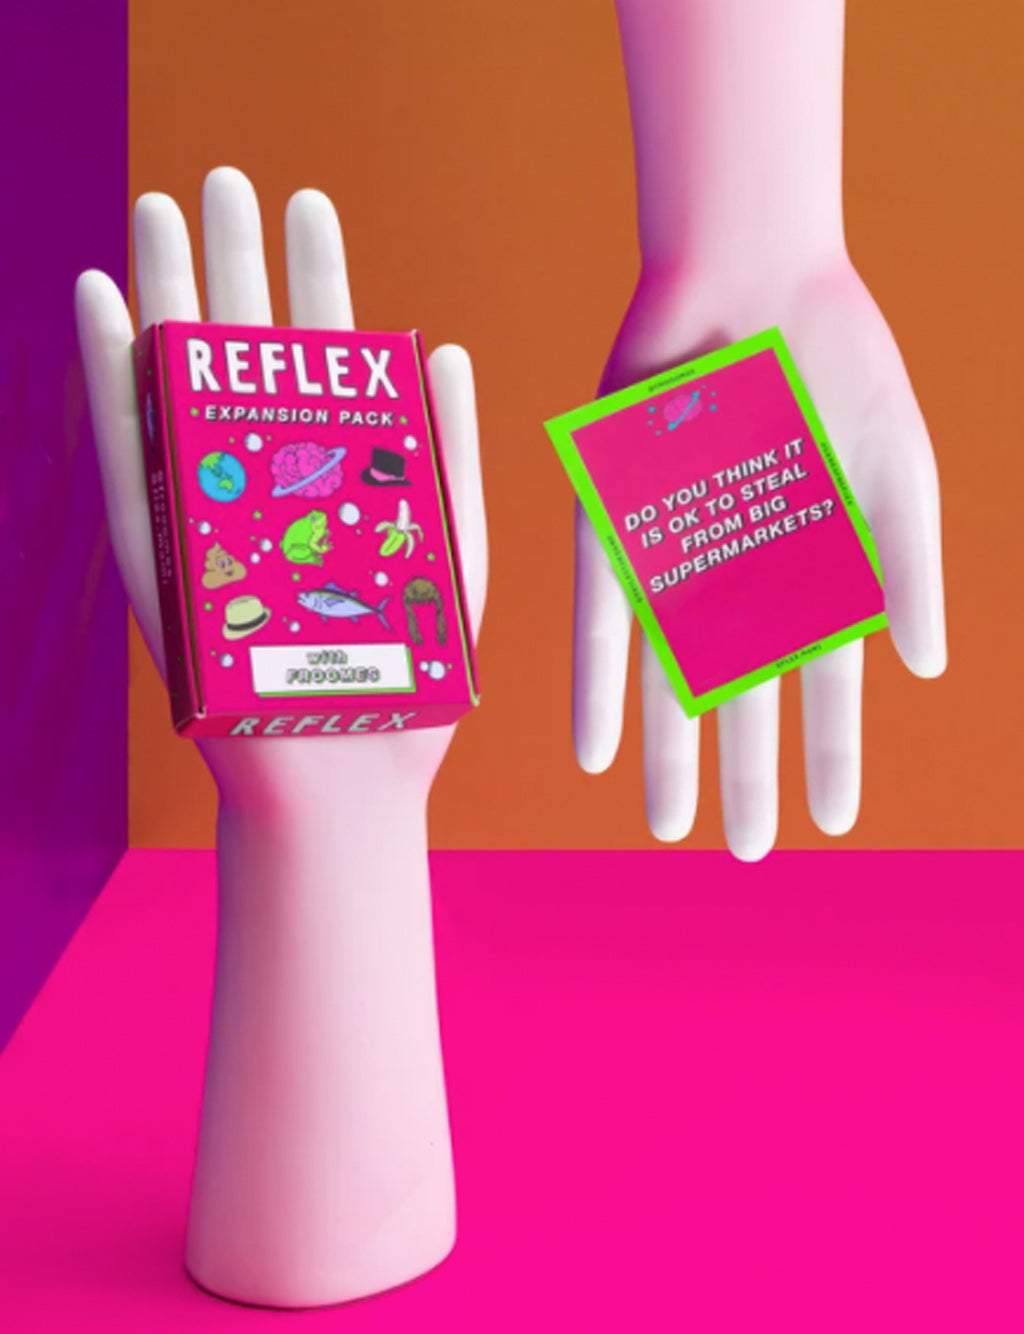 REFLEX: FROOMES EDITION CARD GAME